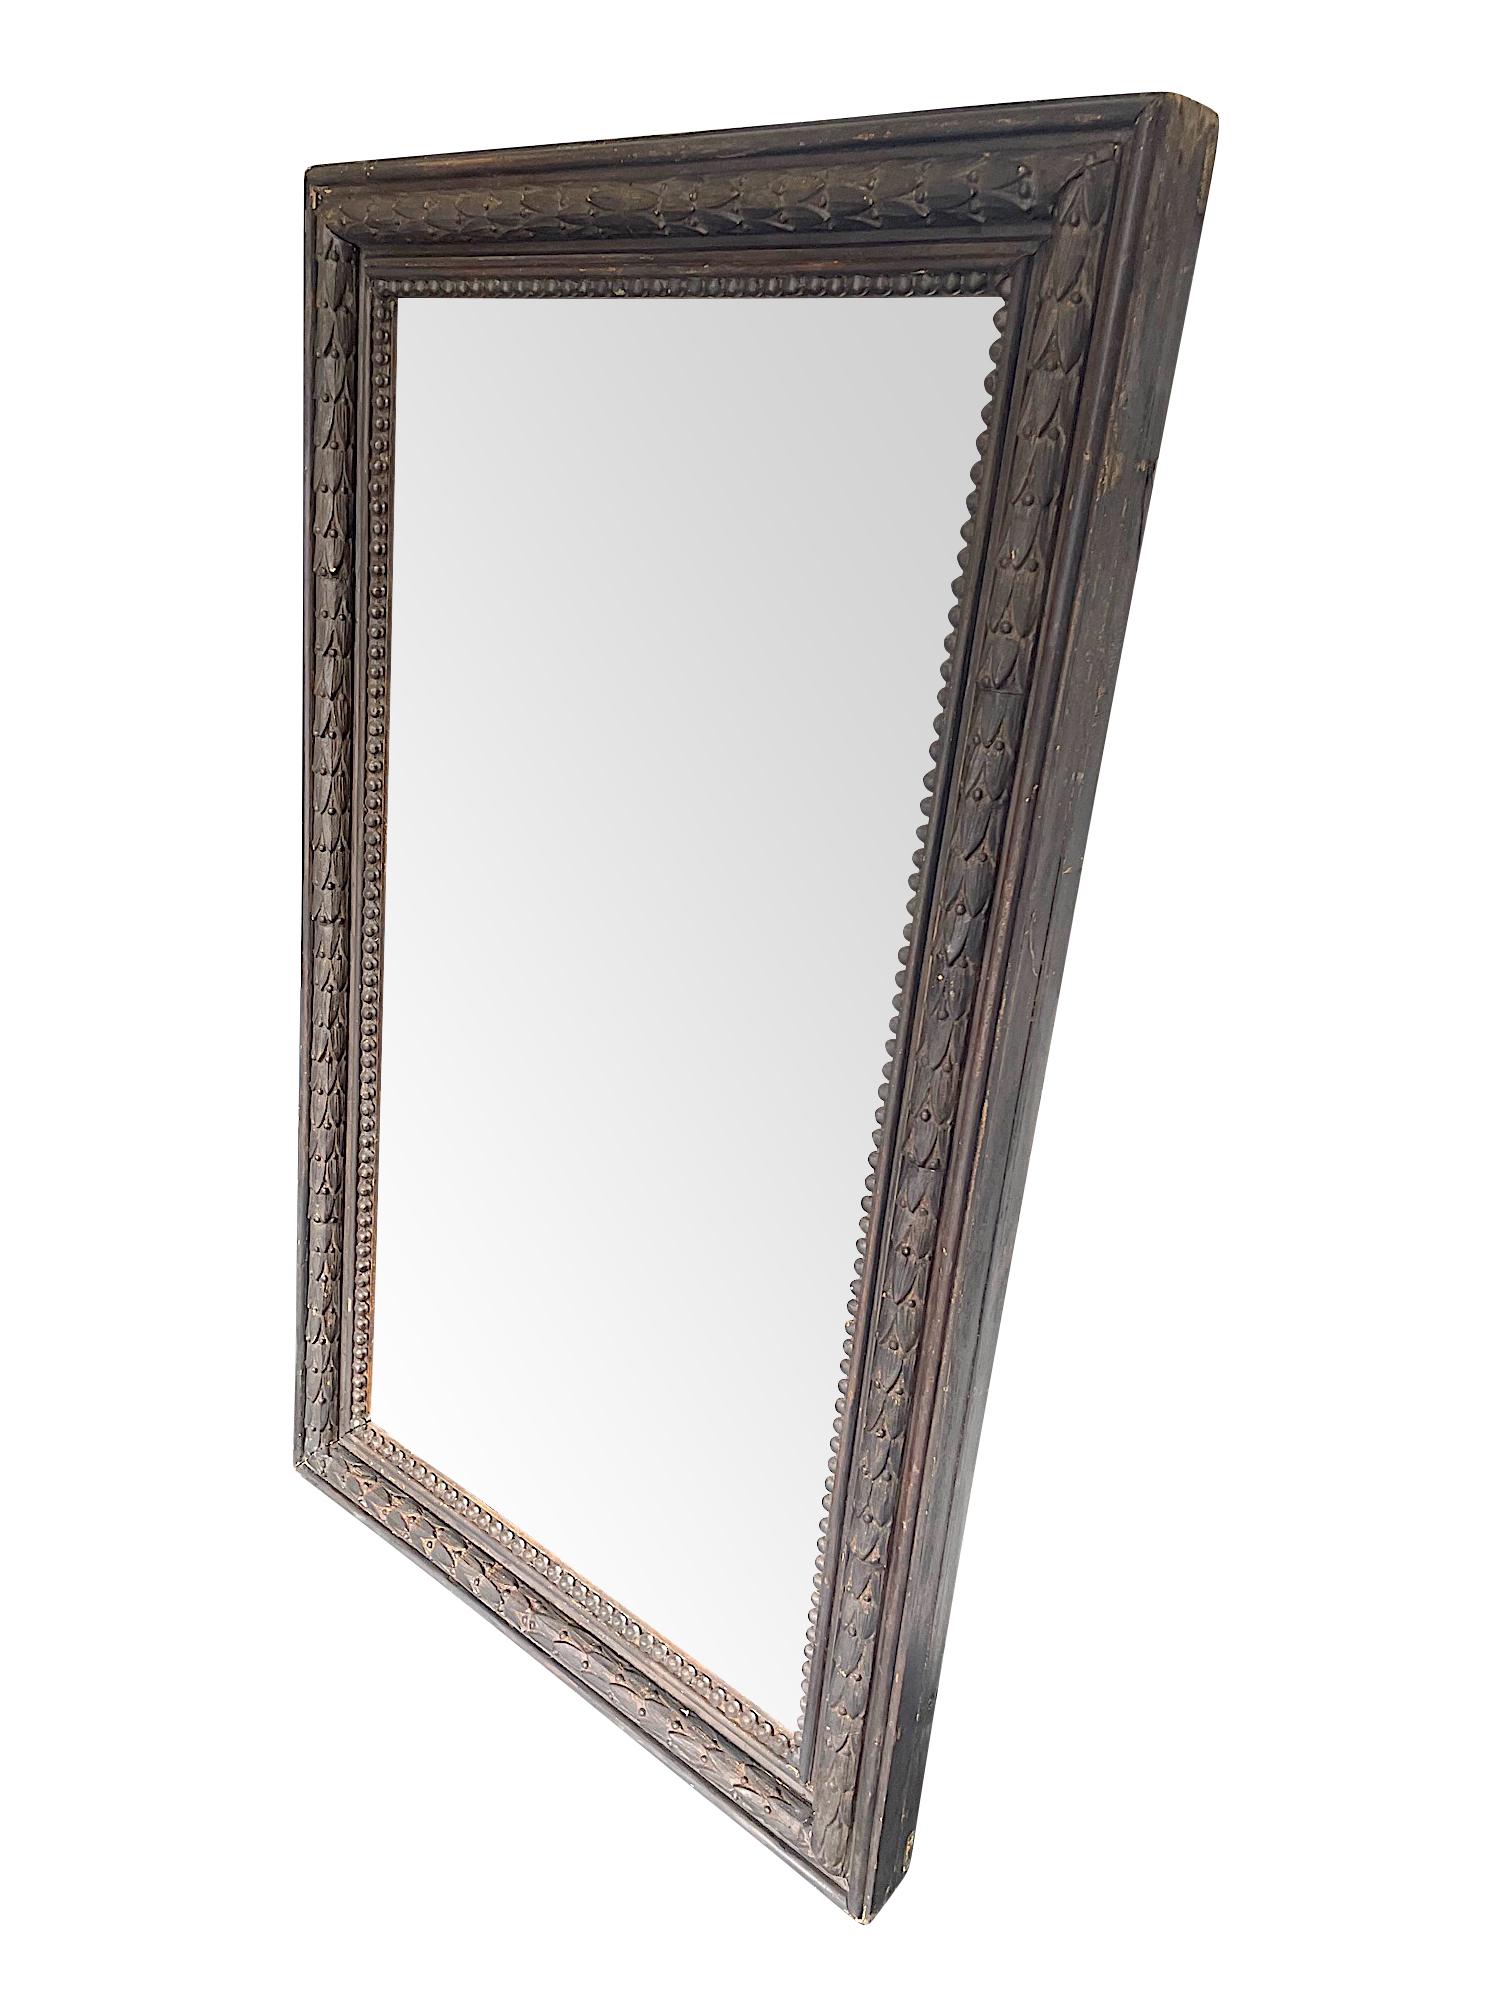 Neoclassical Revival 1900's French Ebonzied Acanthus Leaf Carved Wooden Mirror with Original Plate